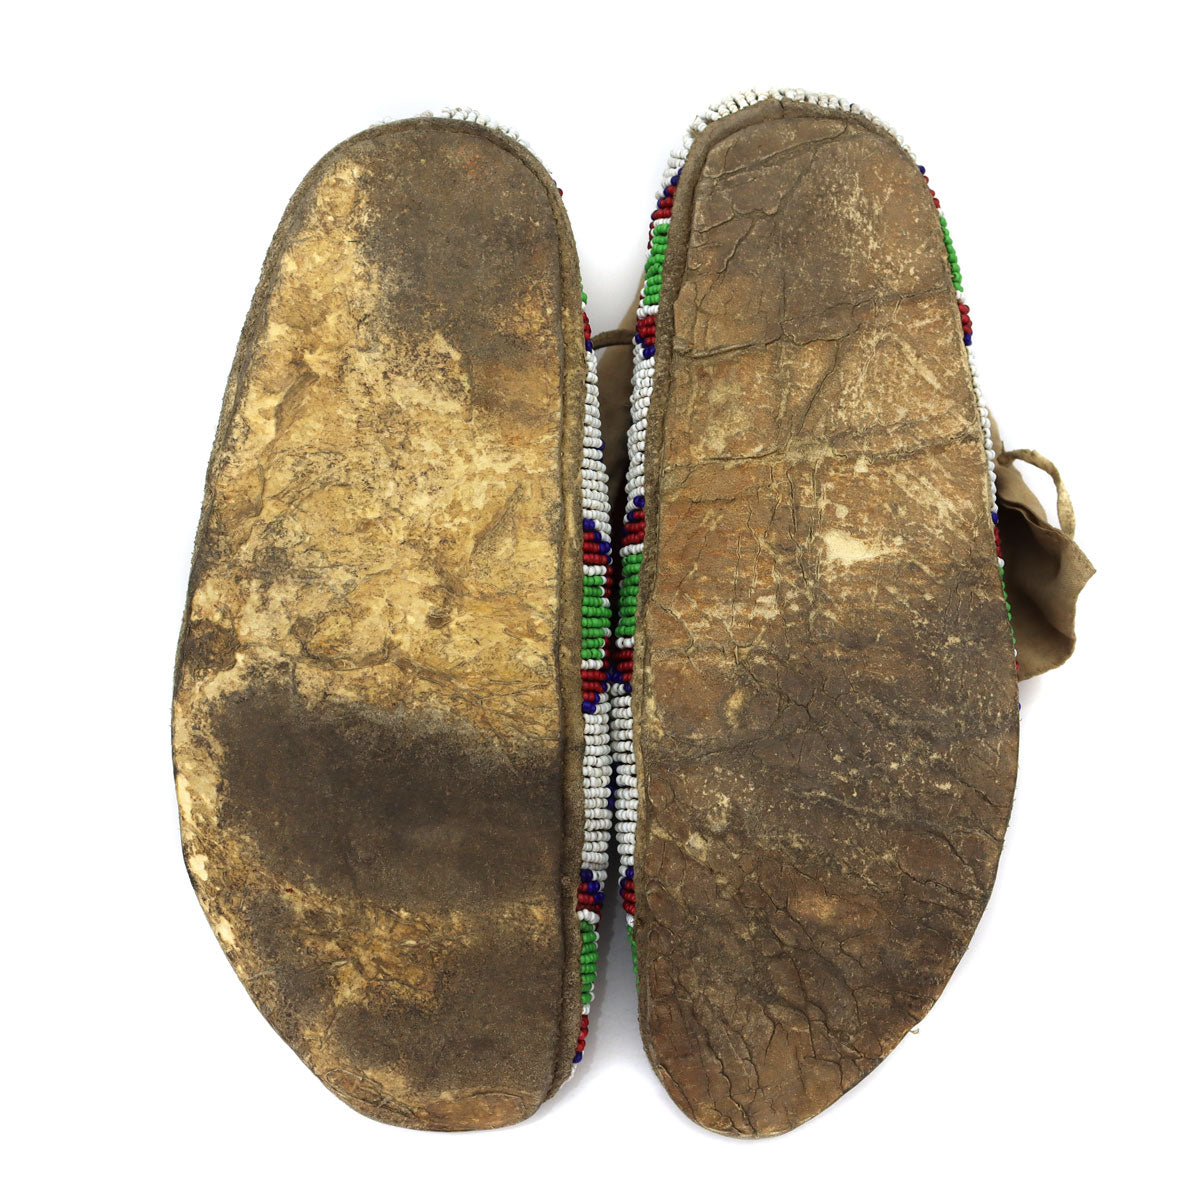 Sioux Beaded Leather Moccasins c. 1890s, 2.75" x 8.5" x 3.25" (DW91963-1021-019)6